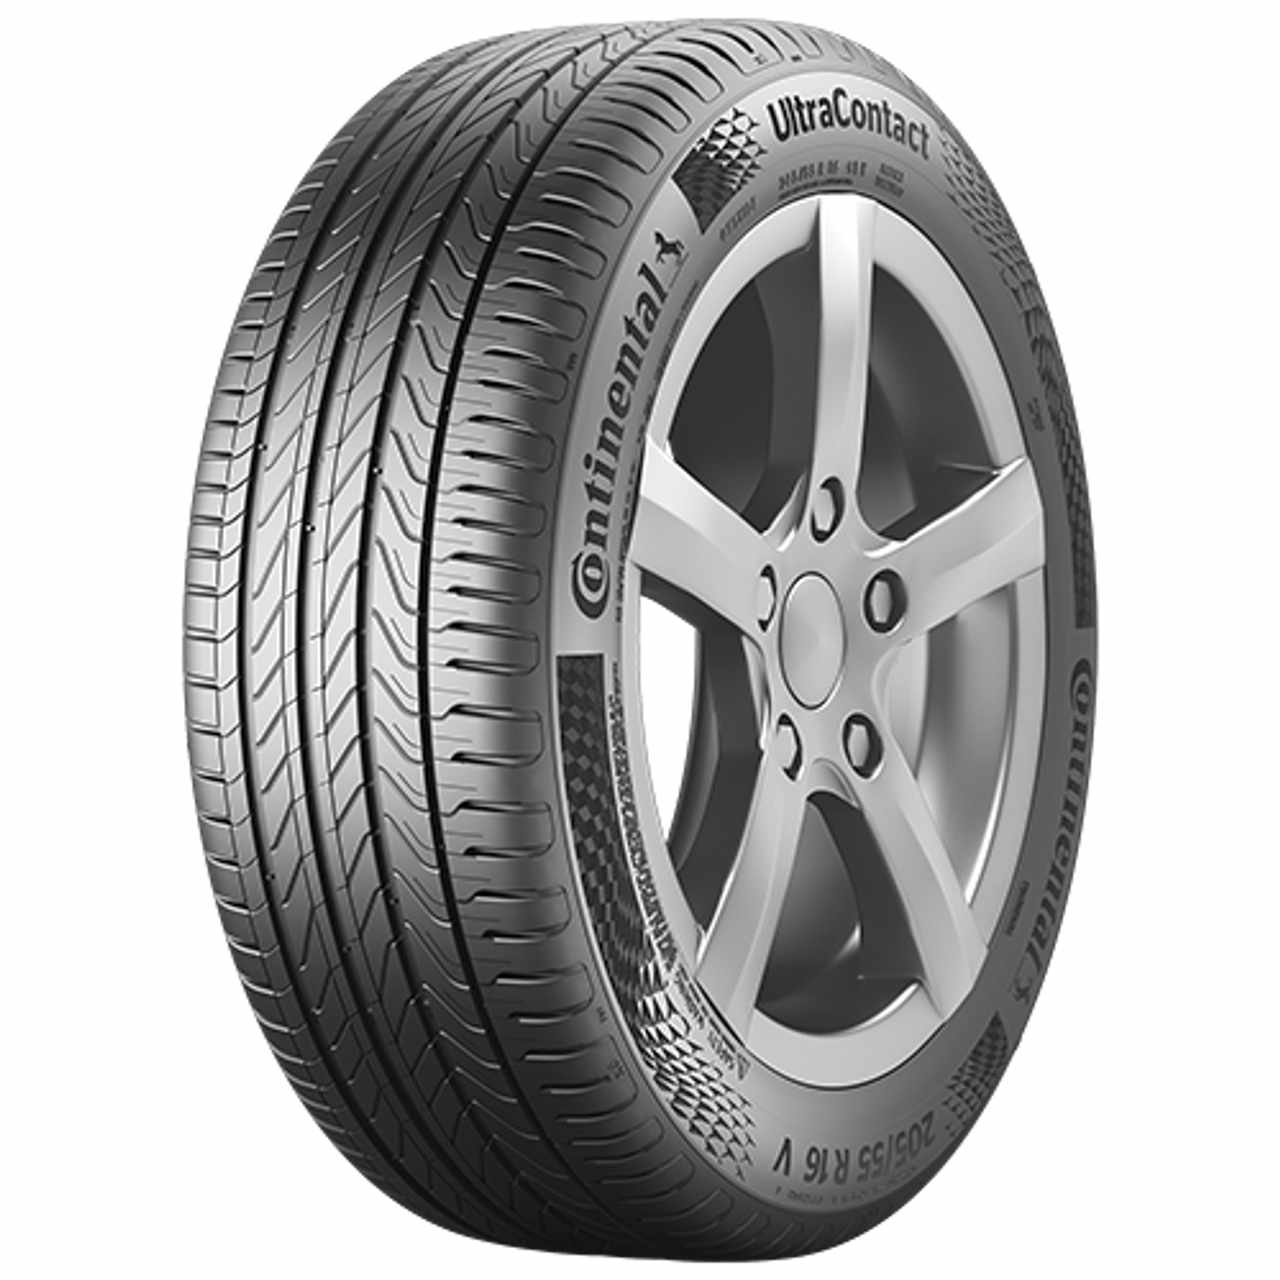 CONTINENTAL ULTRACONTACT (EVc) 235/60R18 103V FR BSW